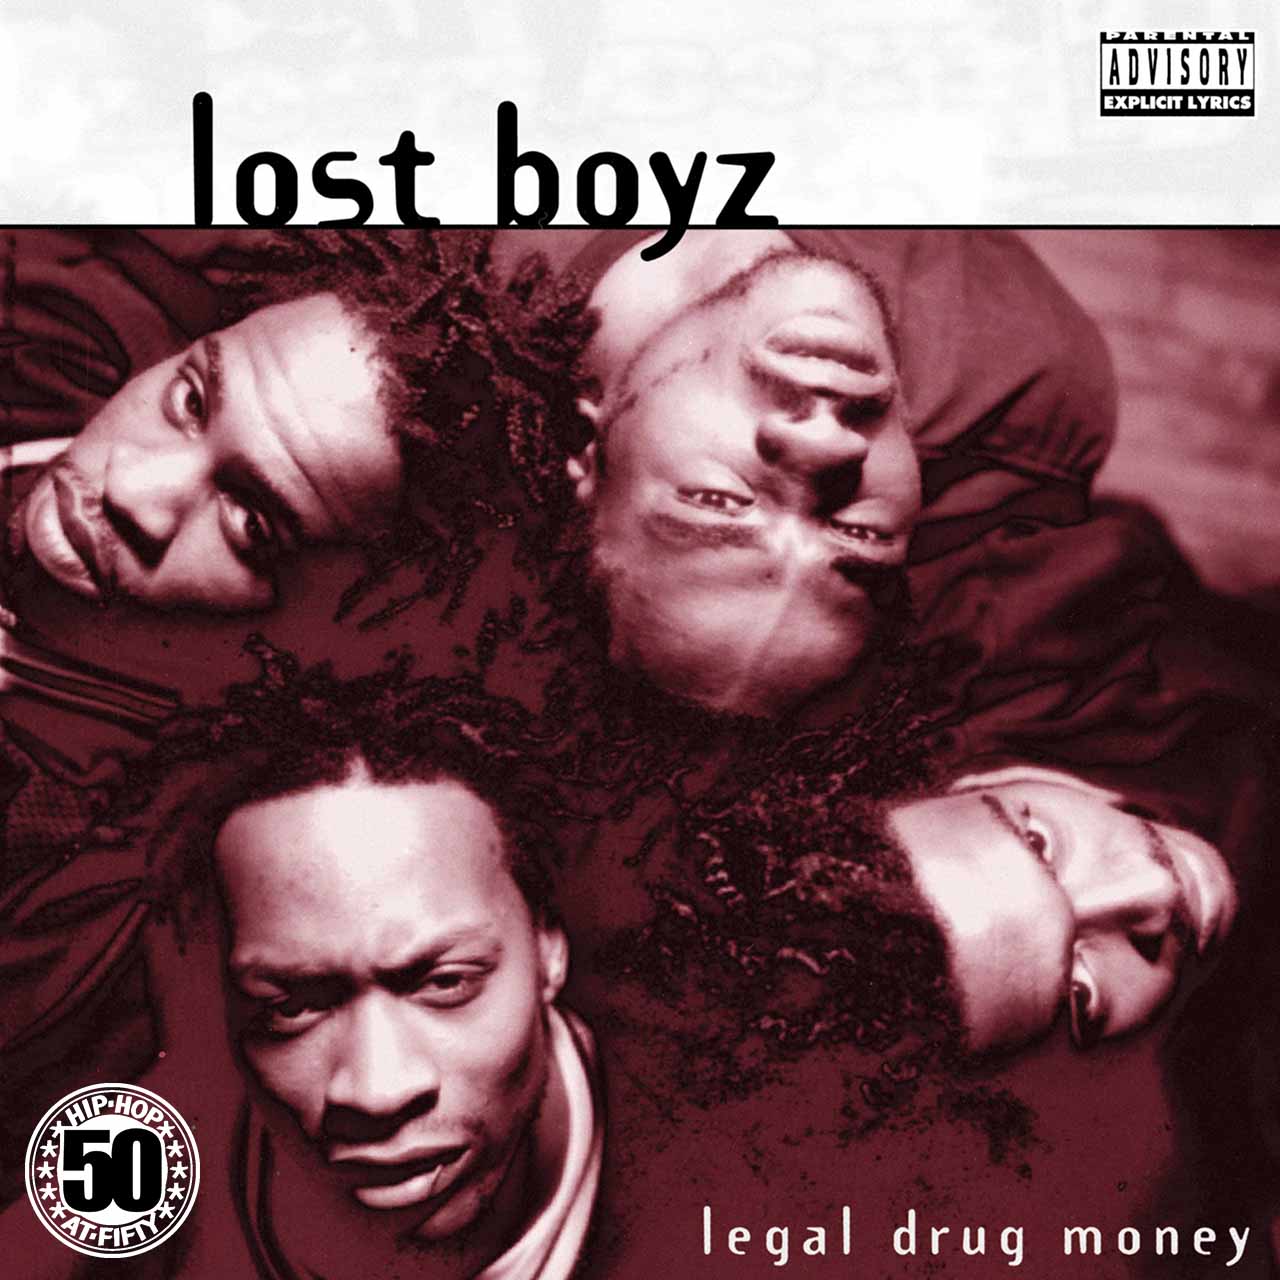 Legal Drug Money': Lost Boyz's Ode To Both Coasts